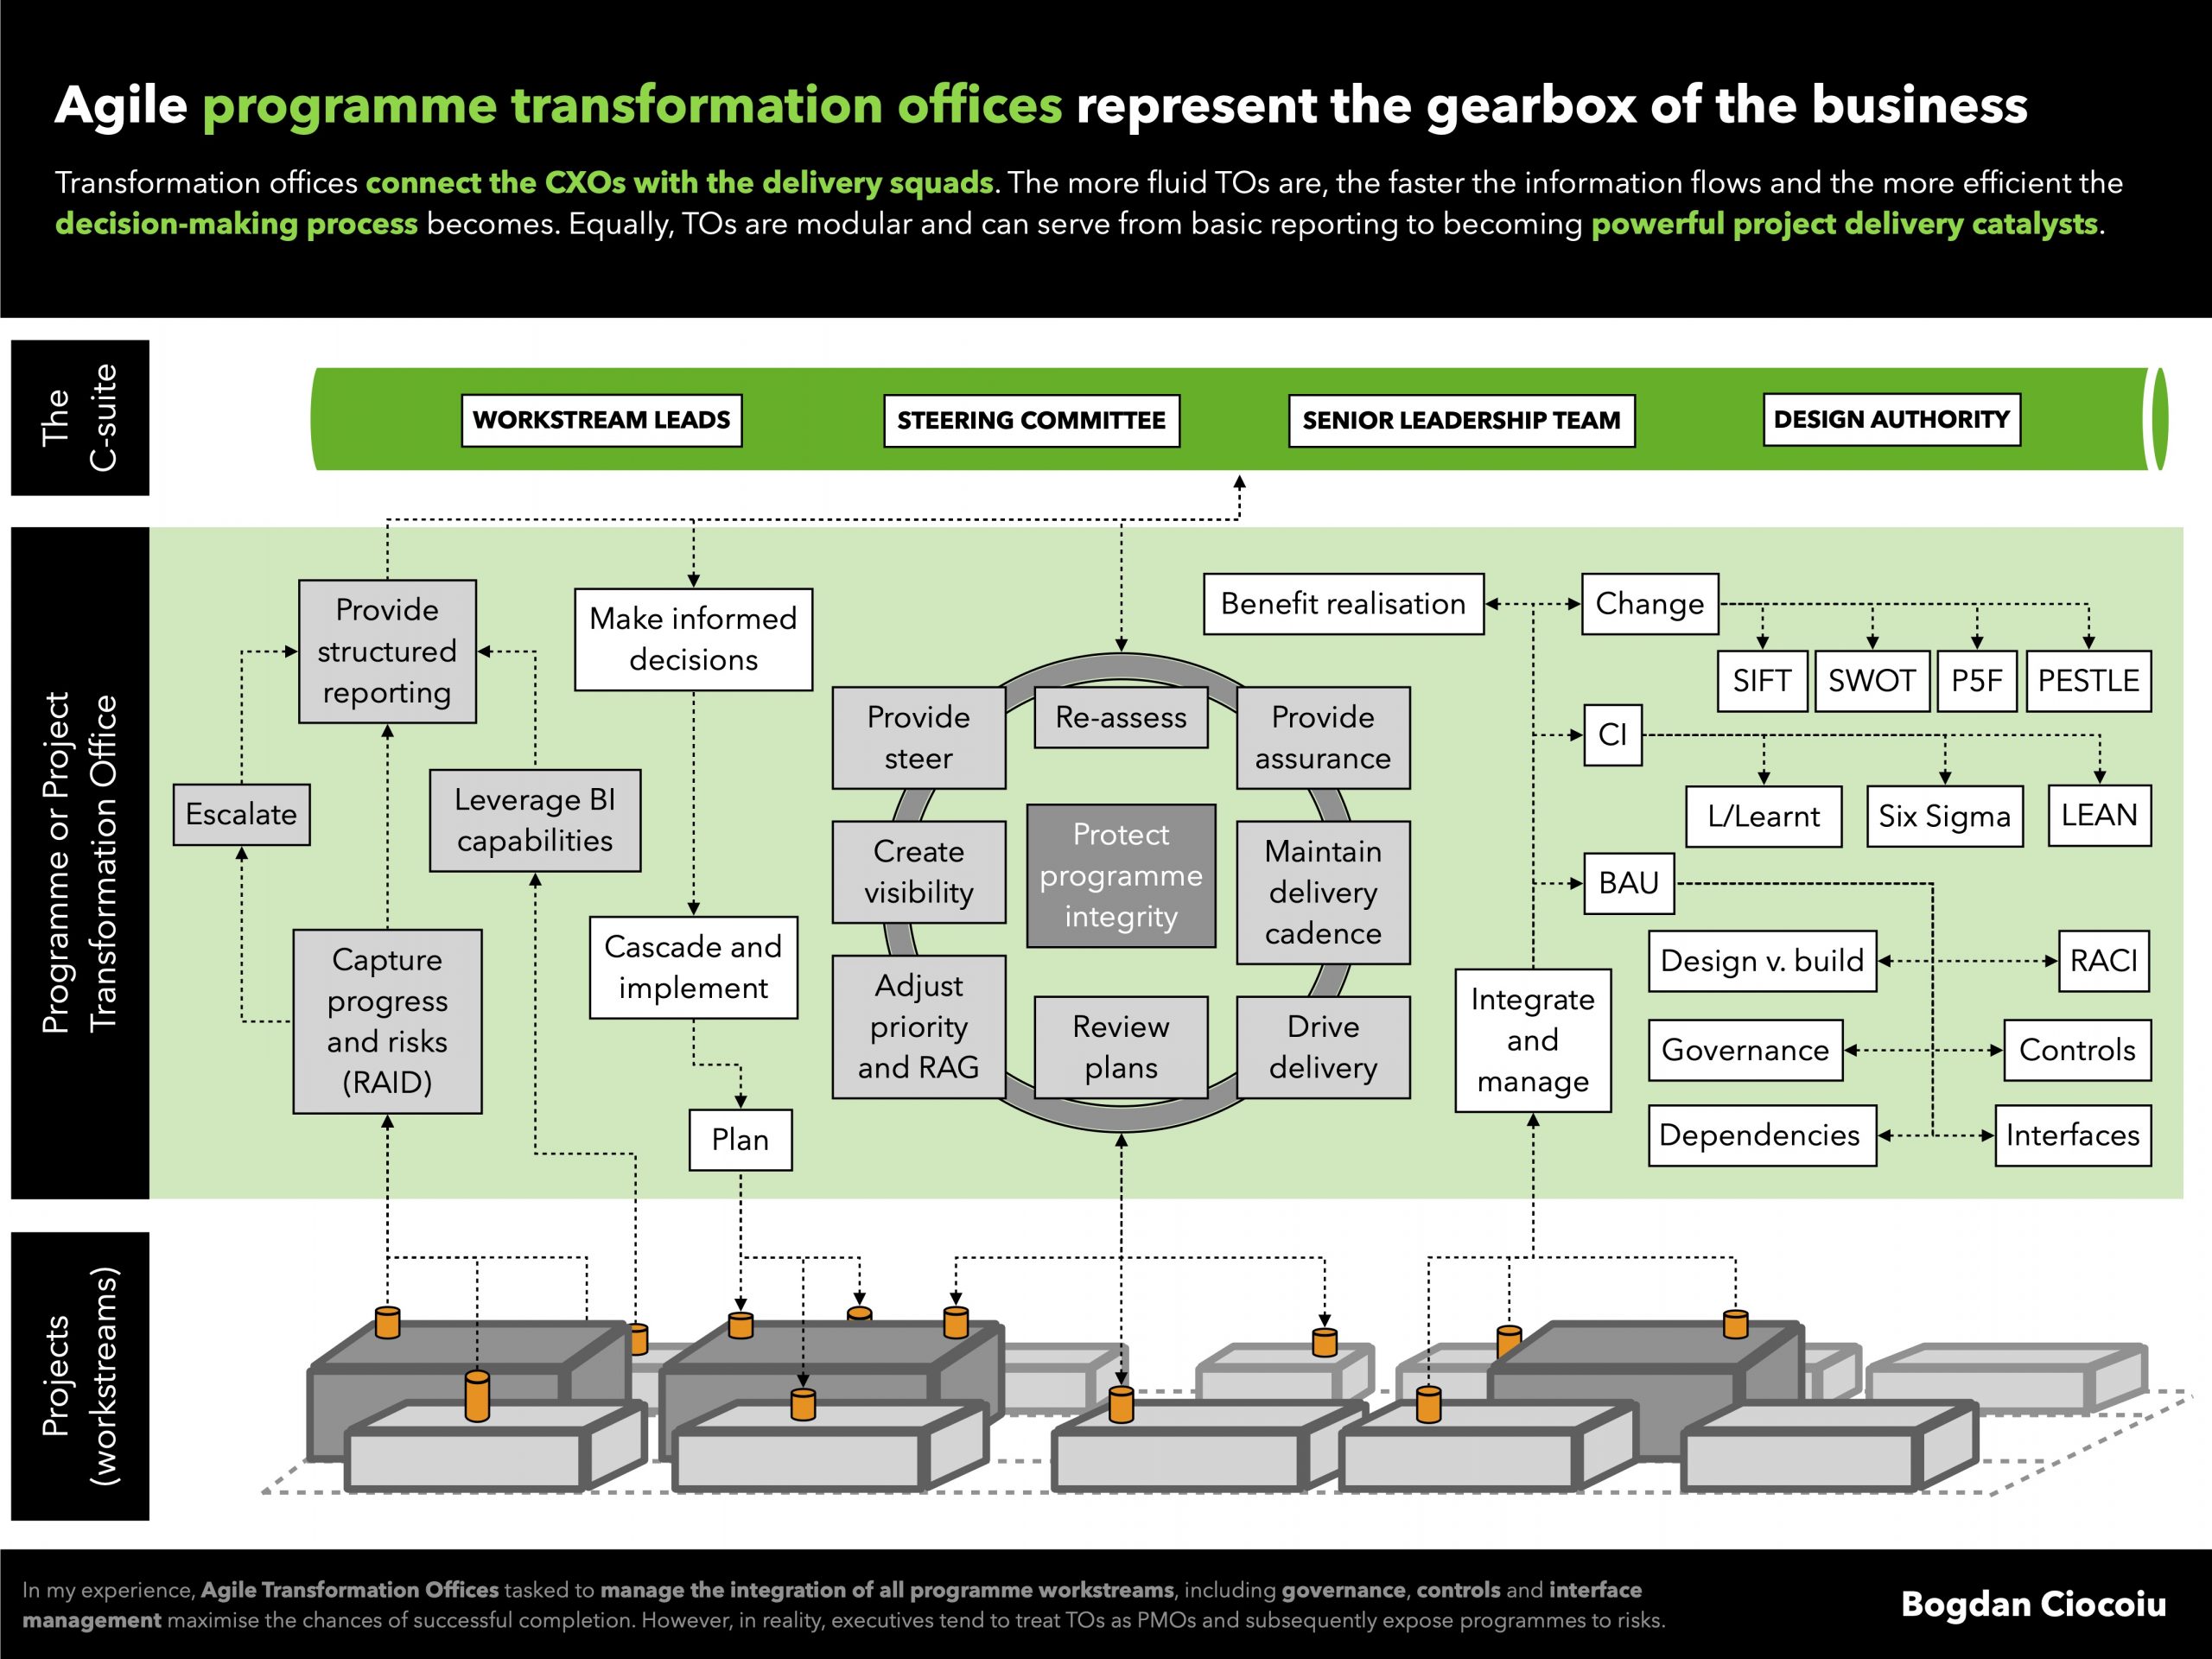 Agile programme transformation offices represent the gearbox of the business